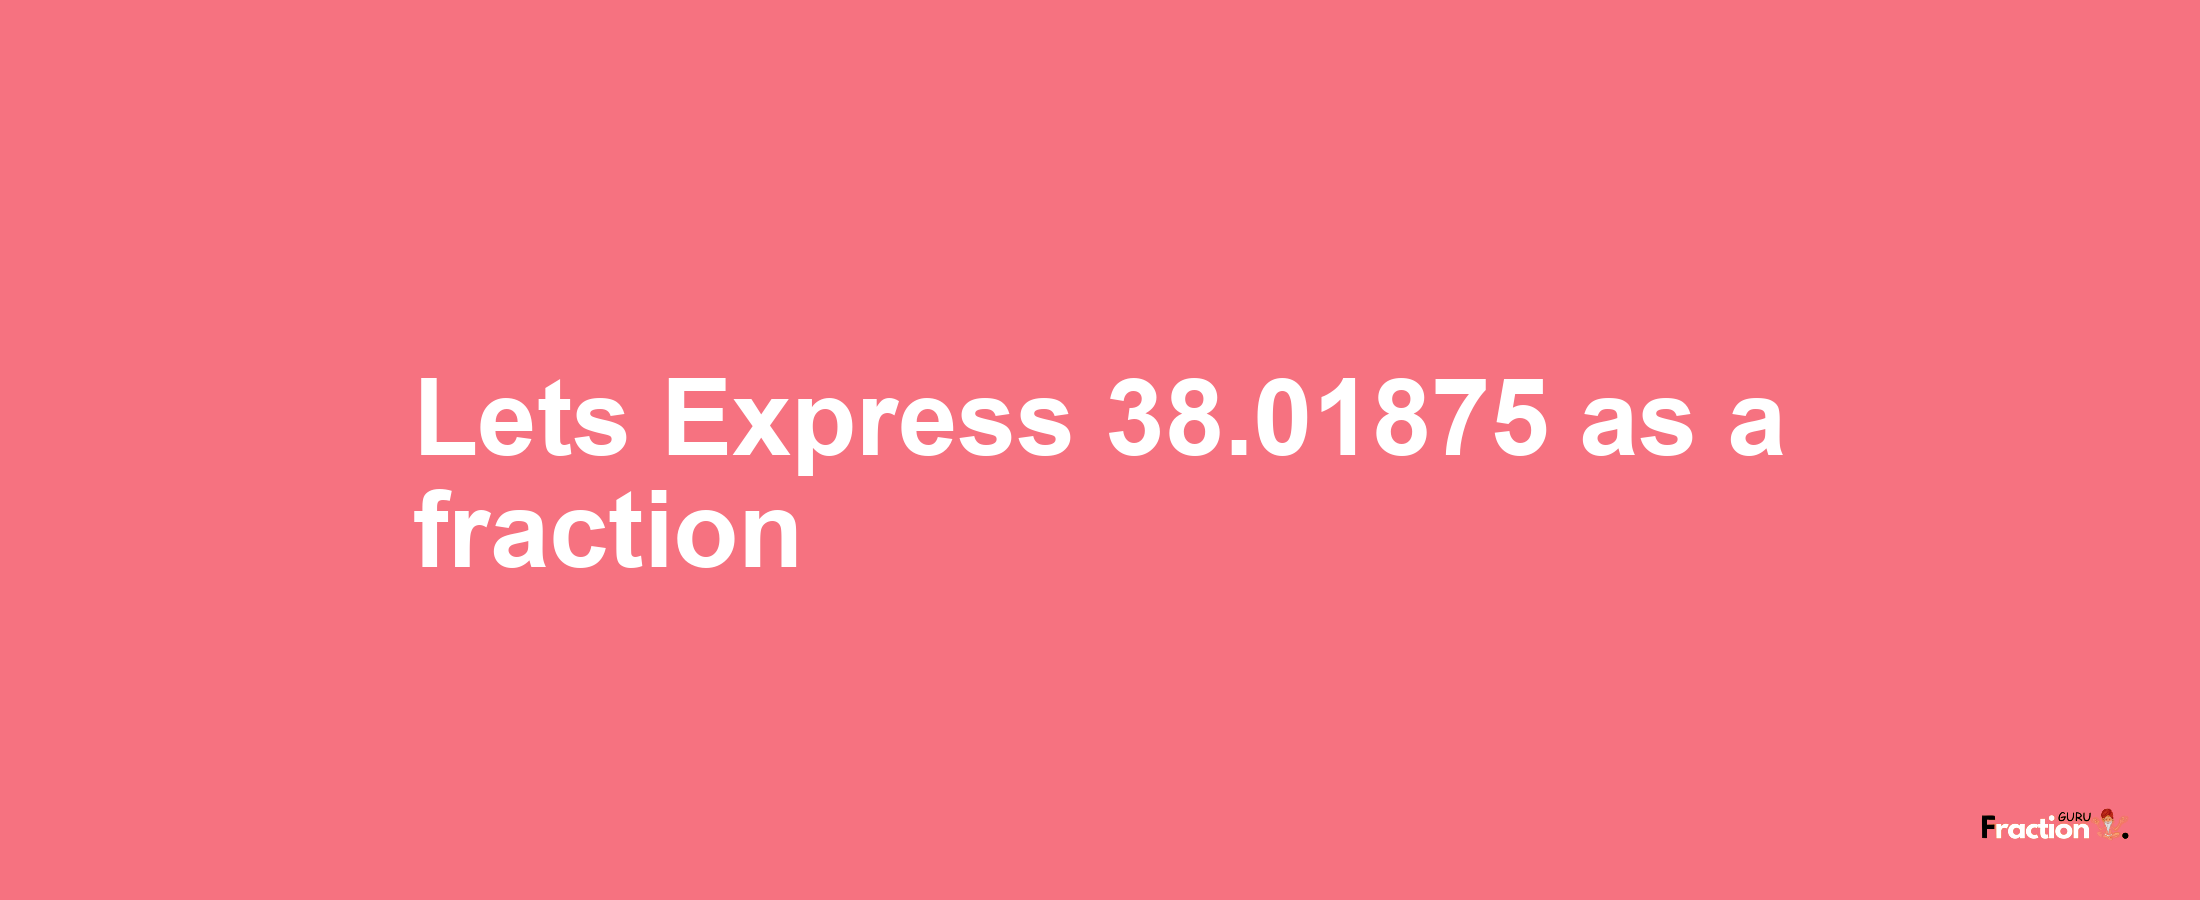 Lets Express 38.01875 as afraction